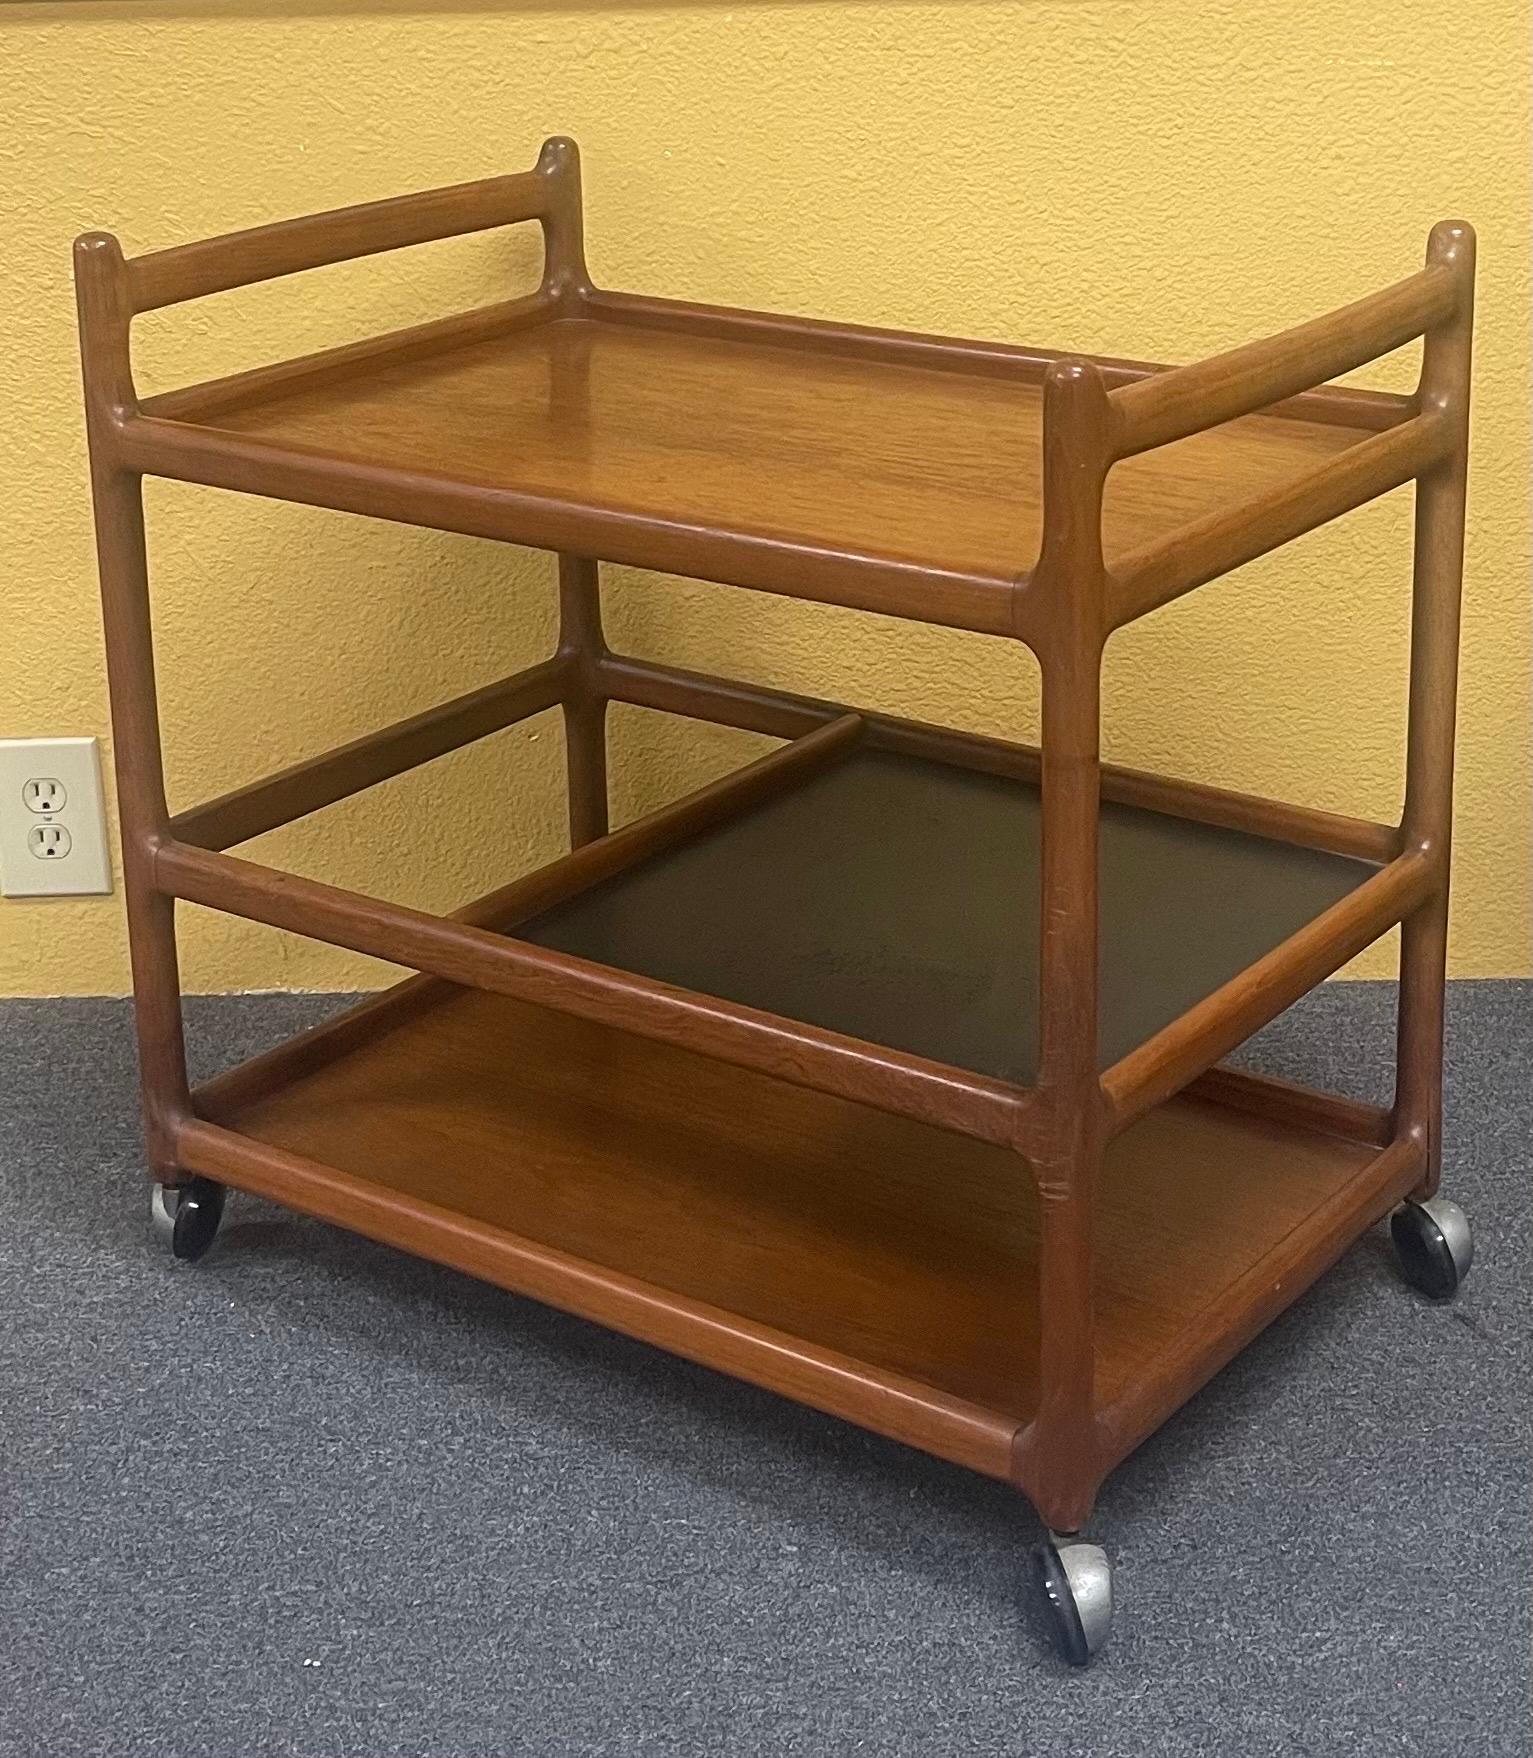 Gorgeous Danish modern teak bar cart / serving trolley with shelves by Johannes Andersen for Silkeborg, circa 1960s. Elegant and simply designed Danish bar cart on gliding wheels. Beautifully detailed wooden joints and structure that encourages you